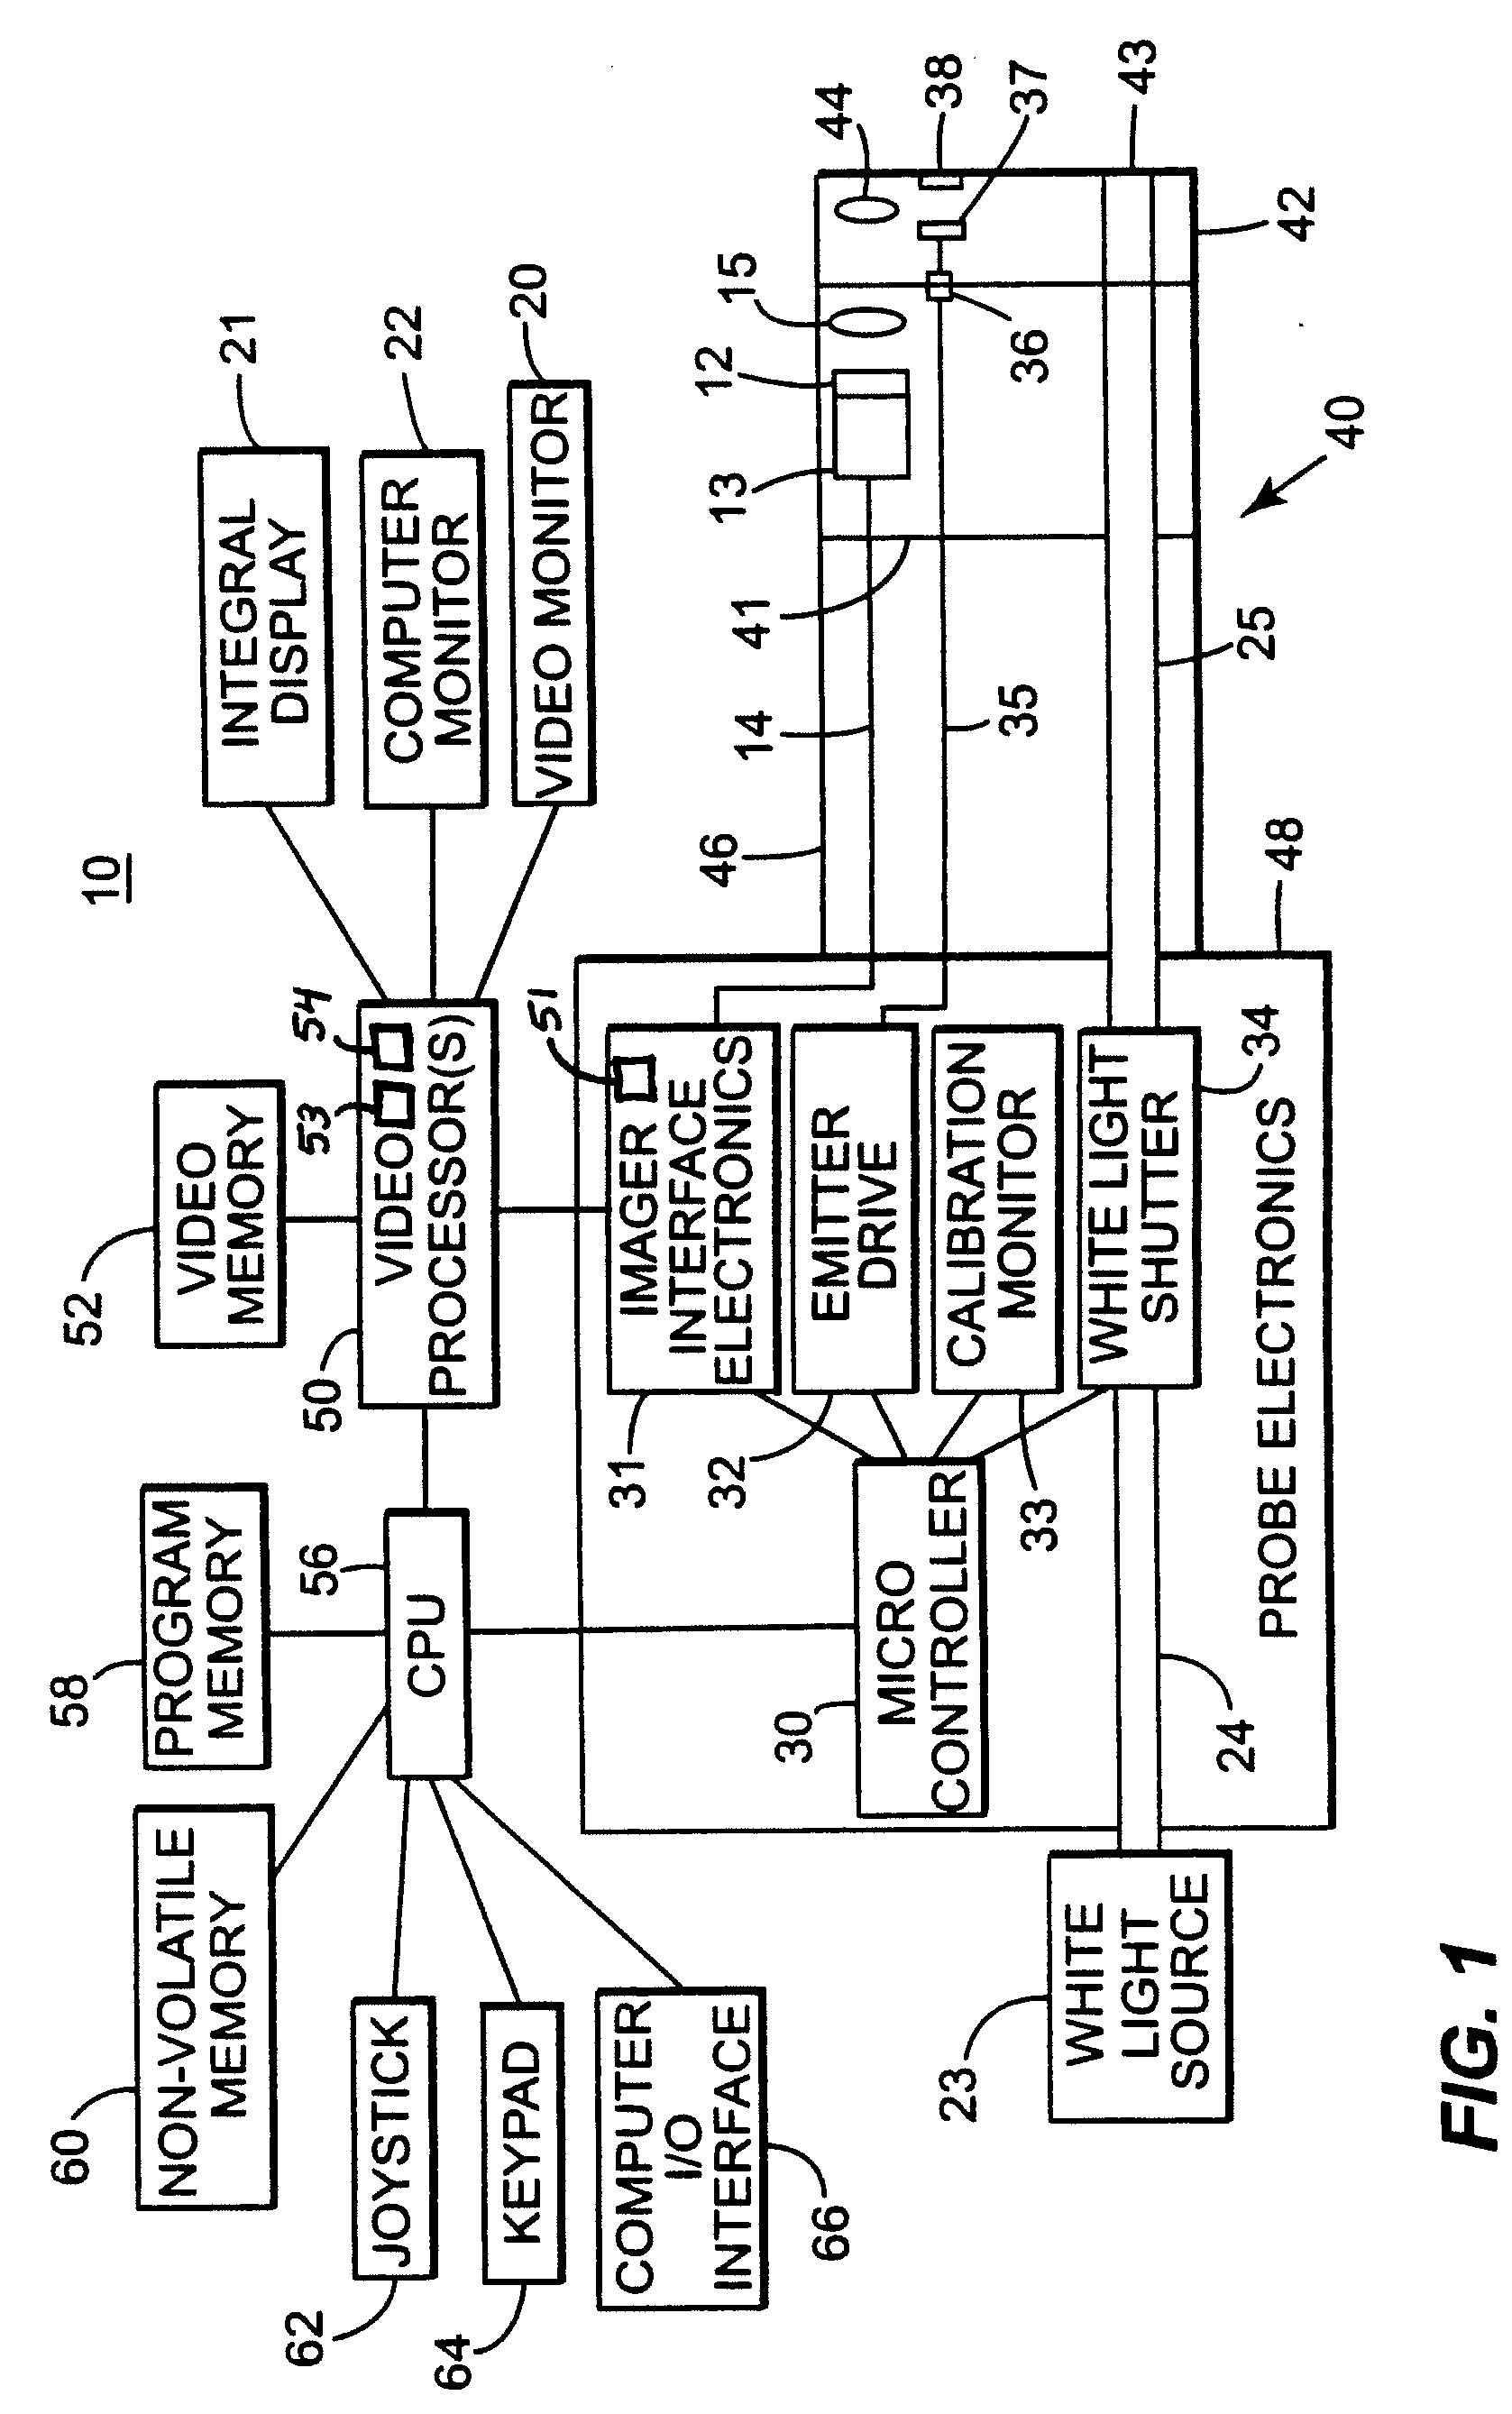 System aspects for a probe system that utilizes structured-light